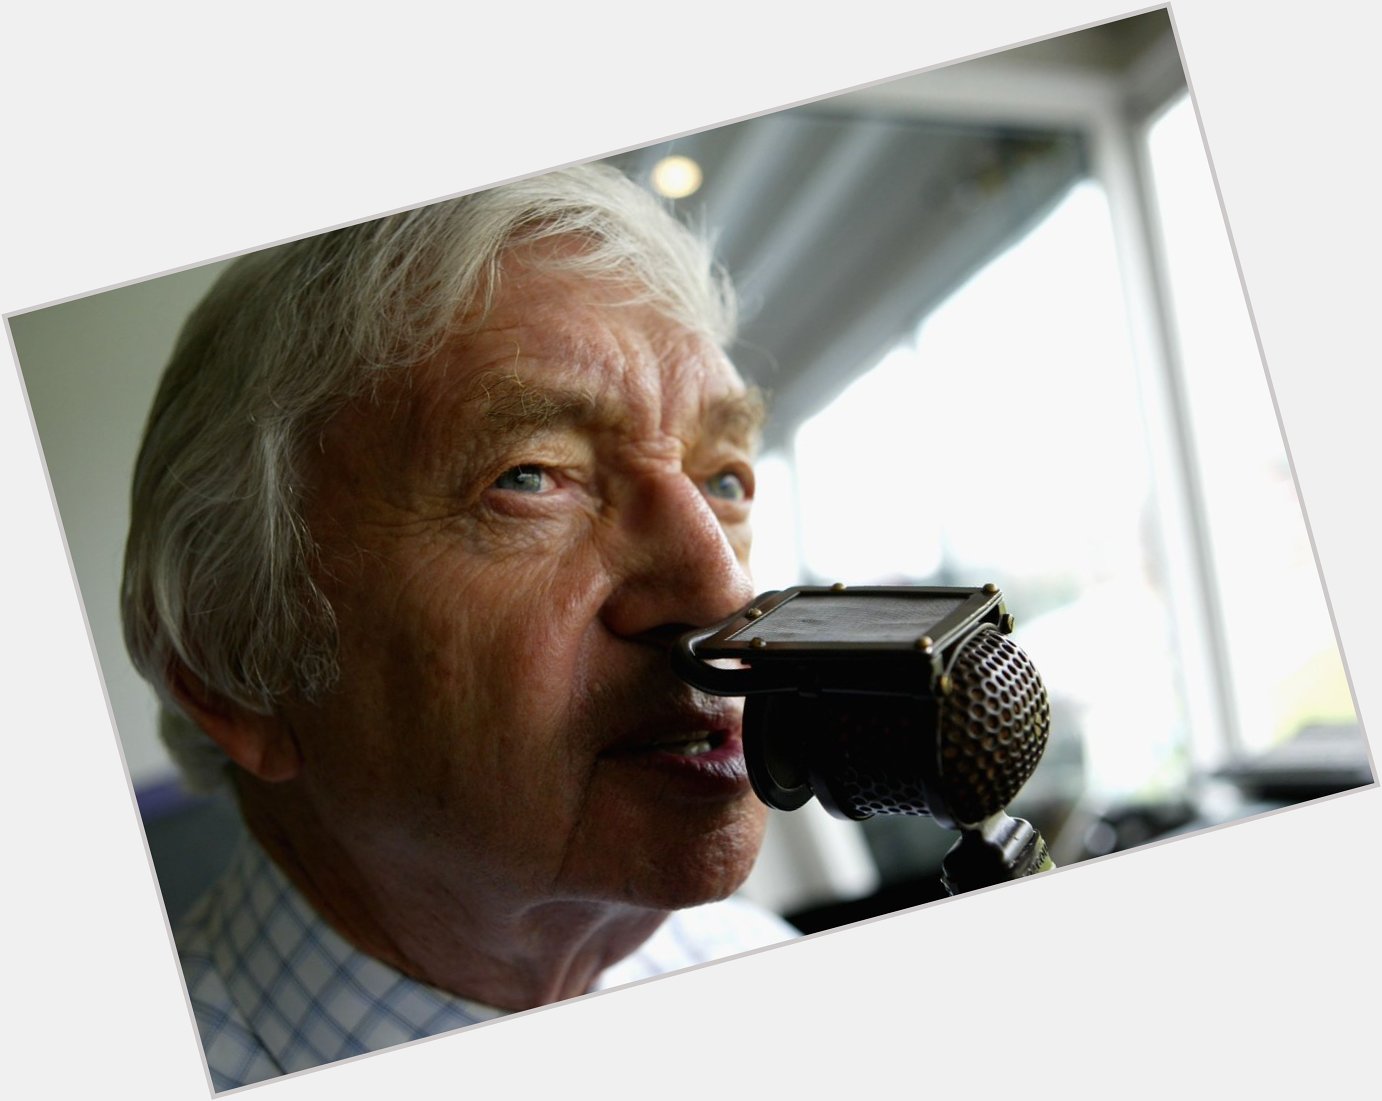  Remembering two of the greatest cricket commentators 

Happy Birthday Richie Benaud and Tony Greig 